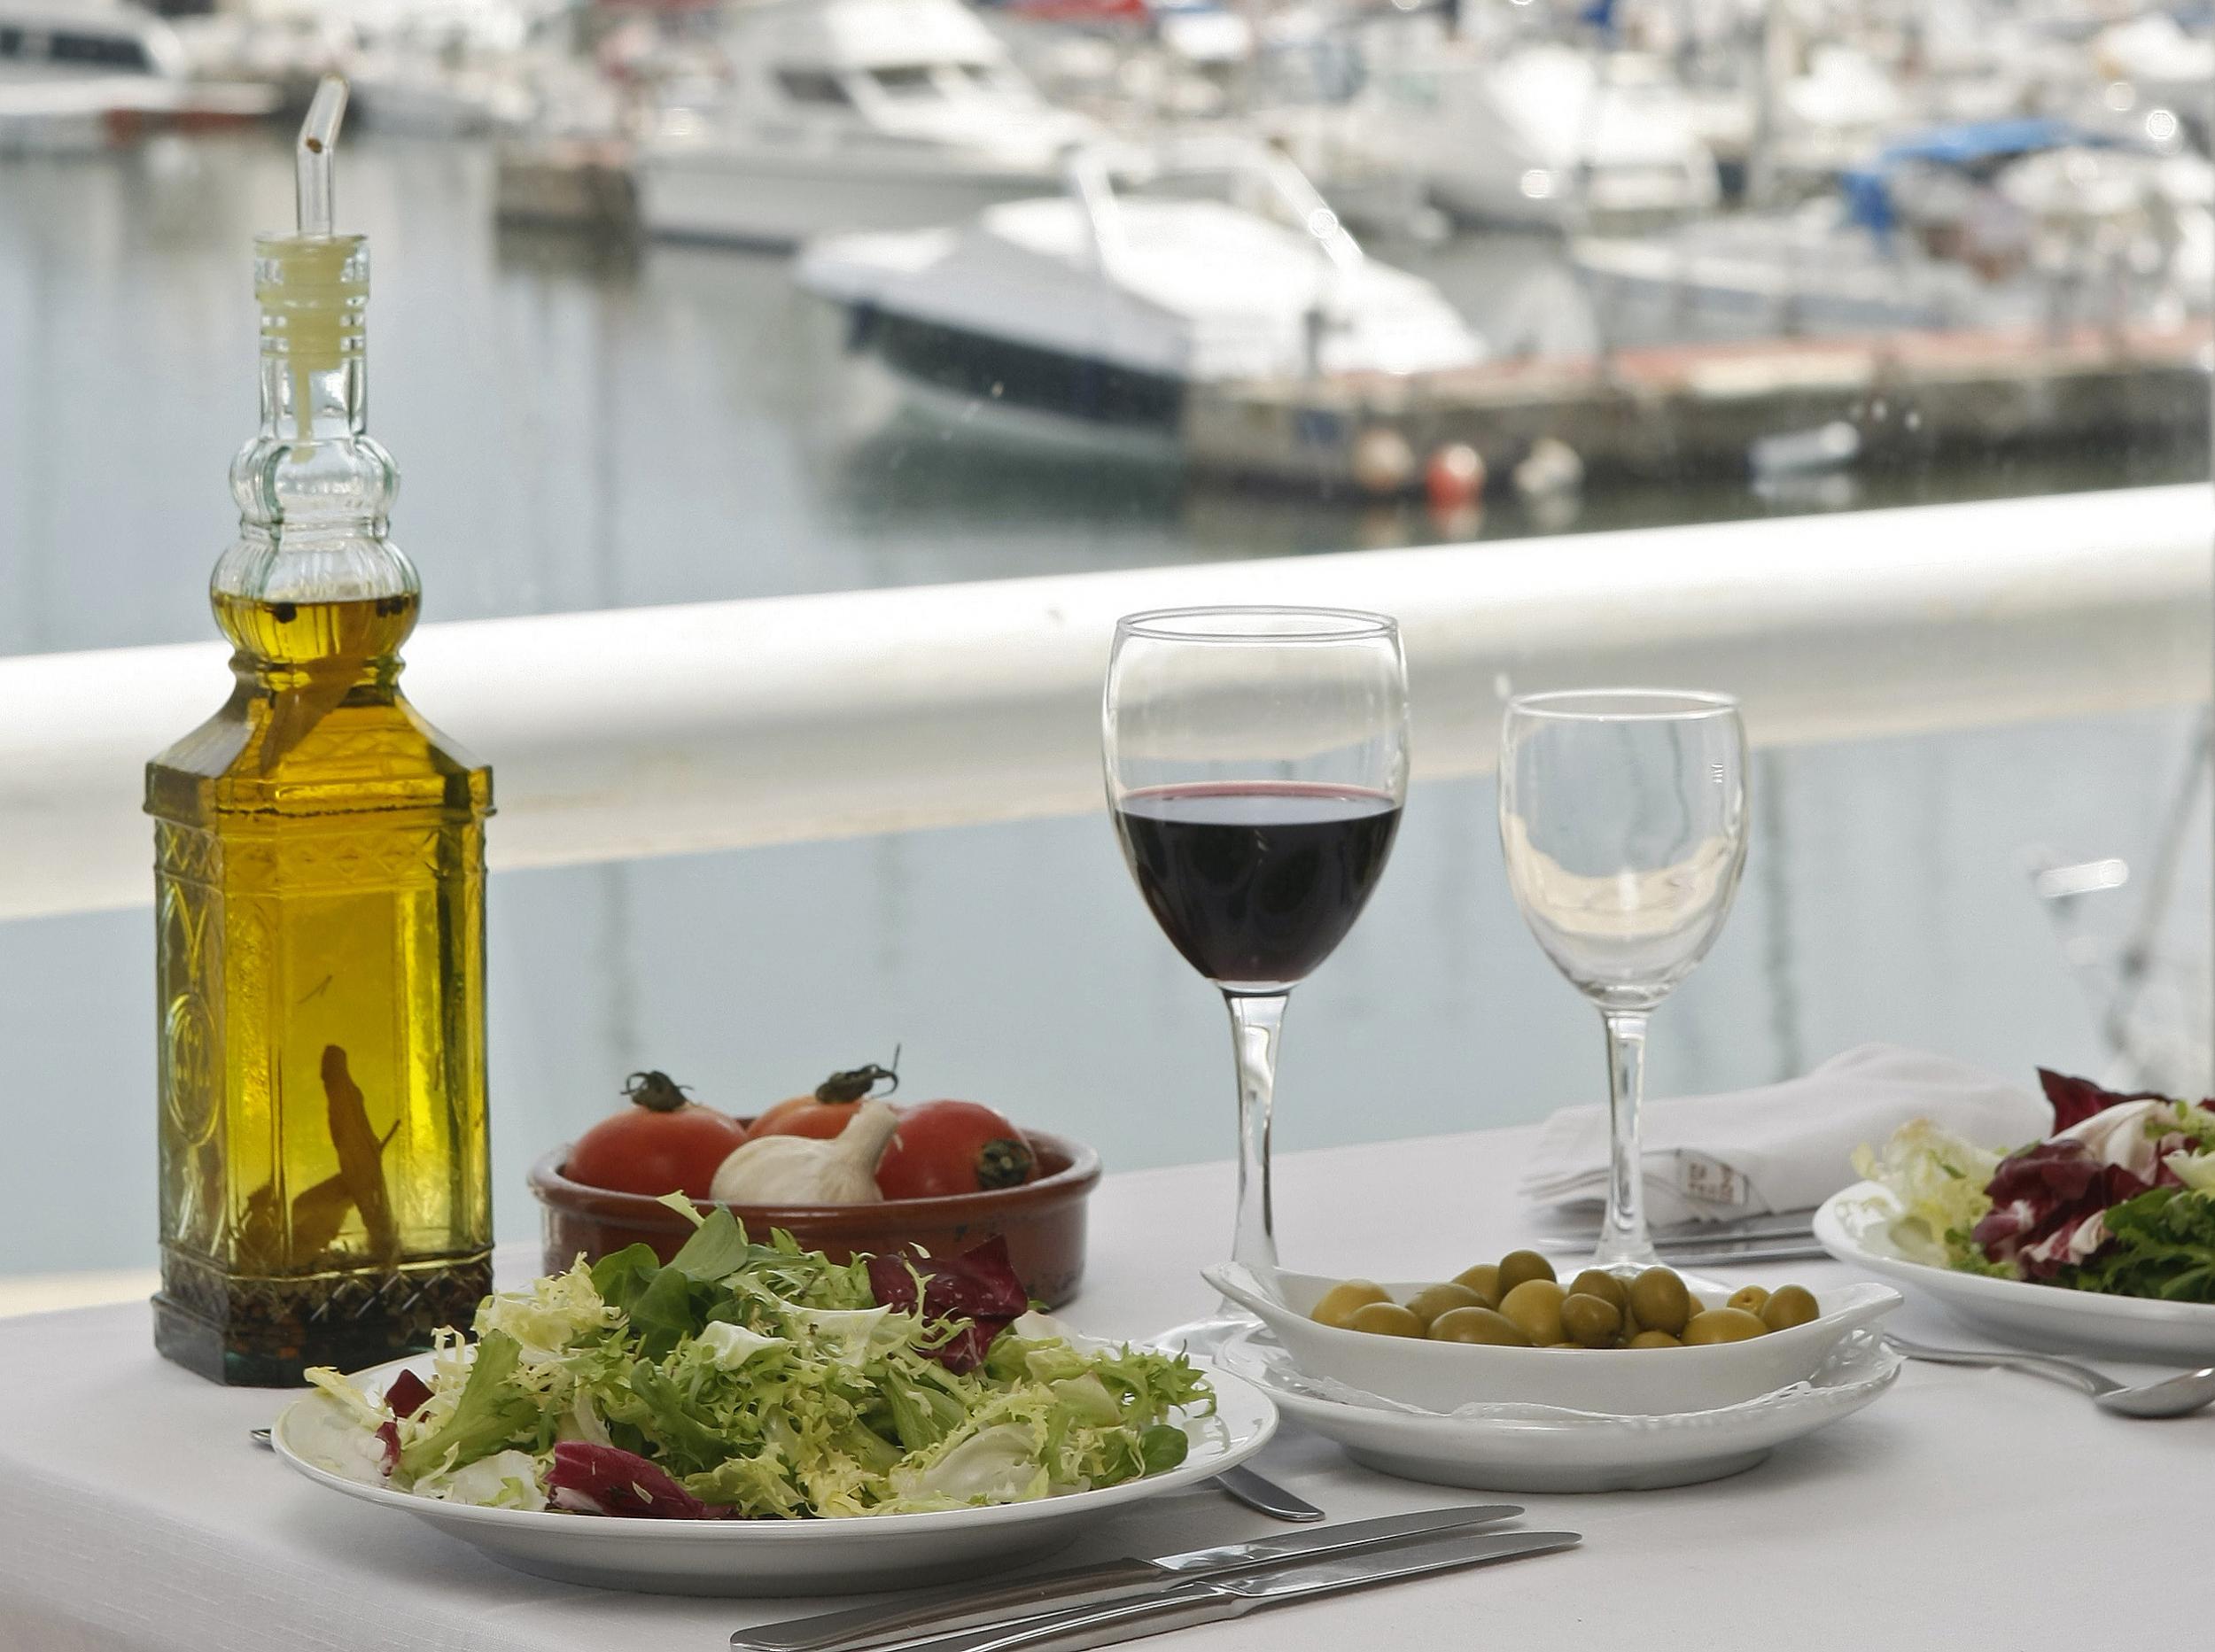 The Mediterranean diet is the latest in a long list of ‘cures’ for mental health problems